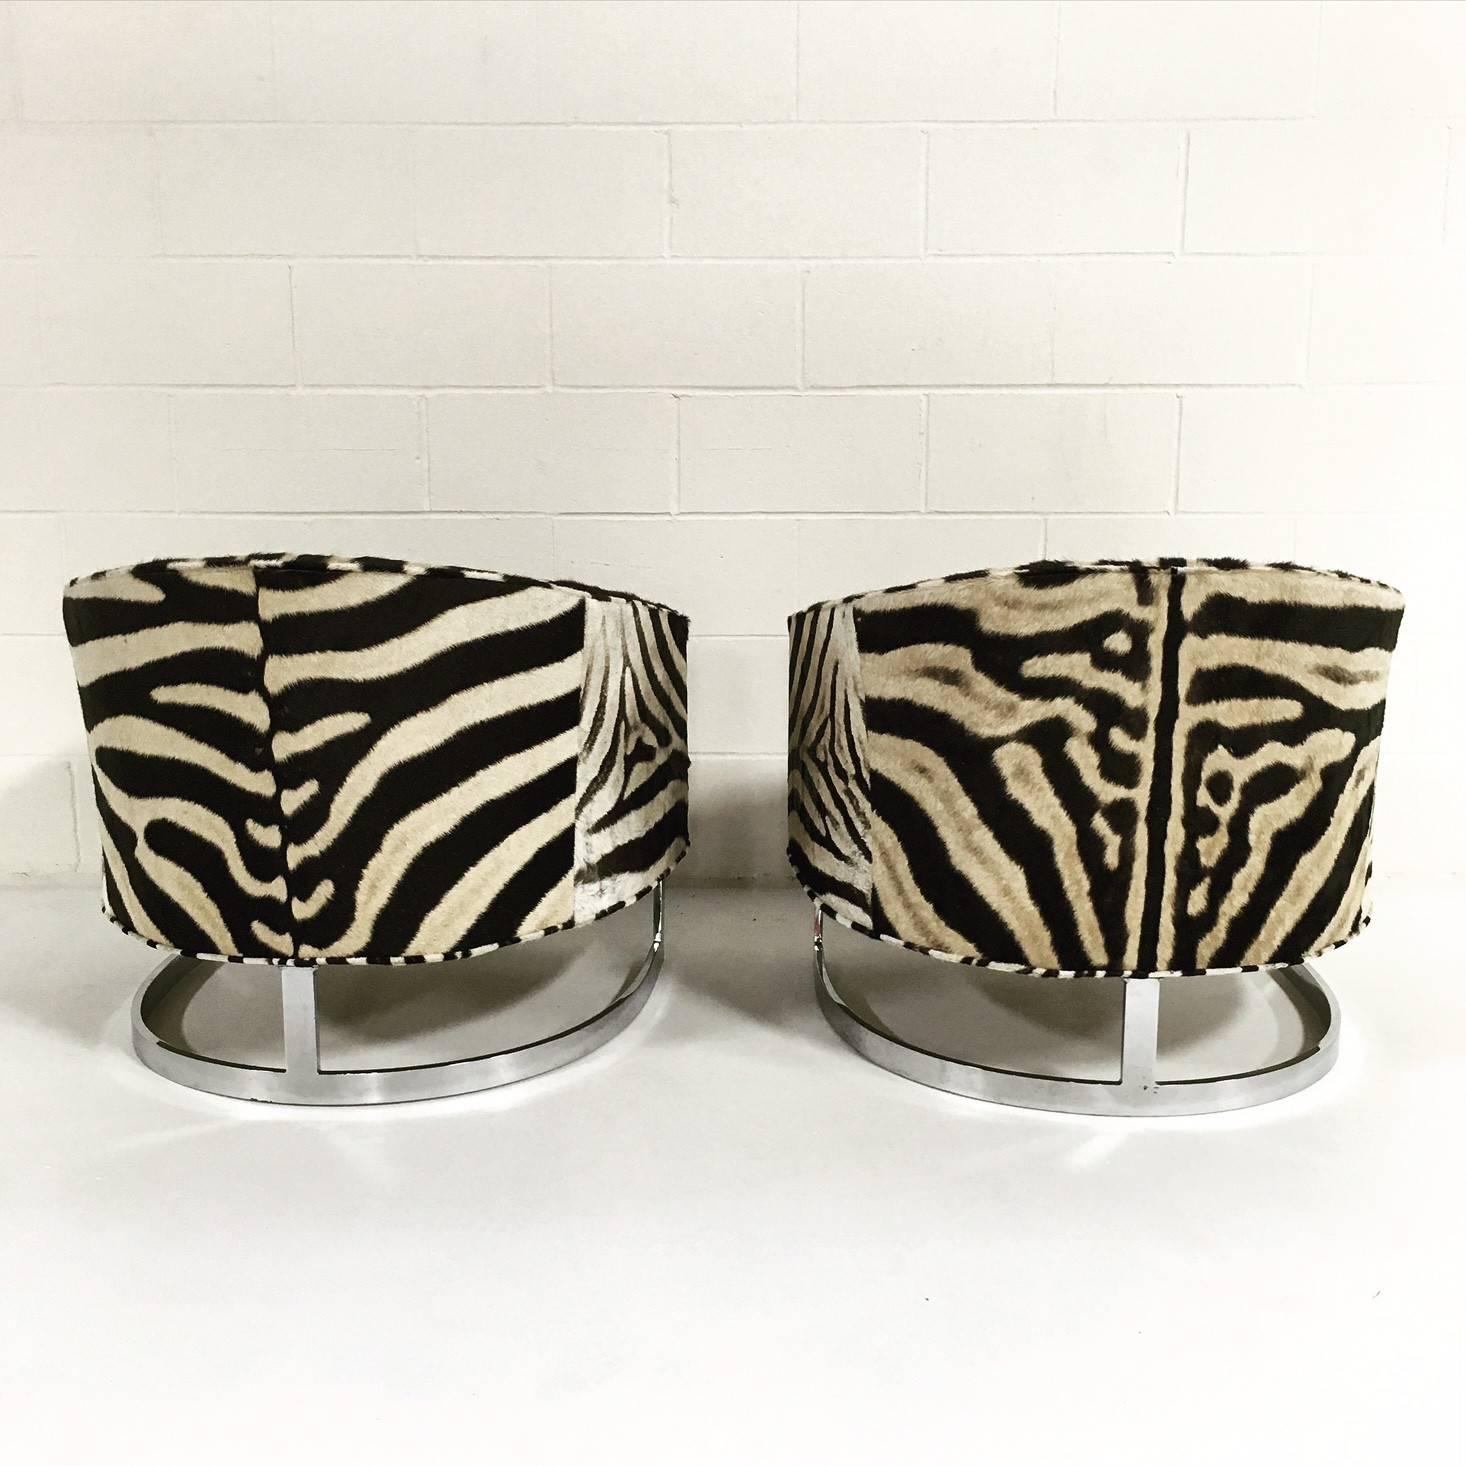 American Pair of Milo Baughman Club Chairs with Chrome Frame in Zebra Hide